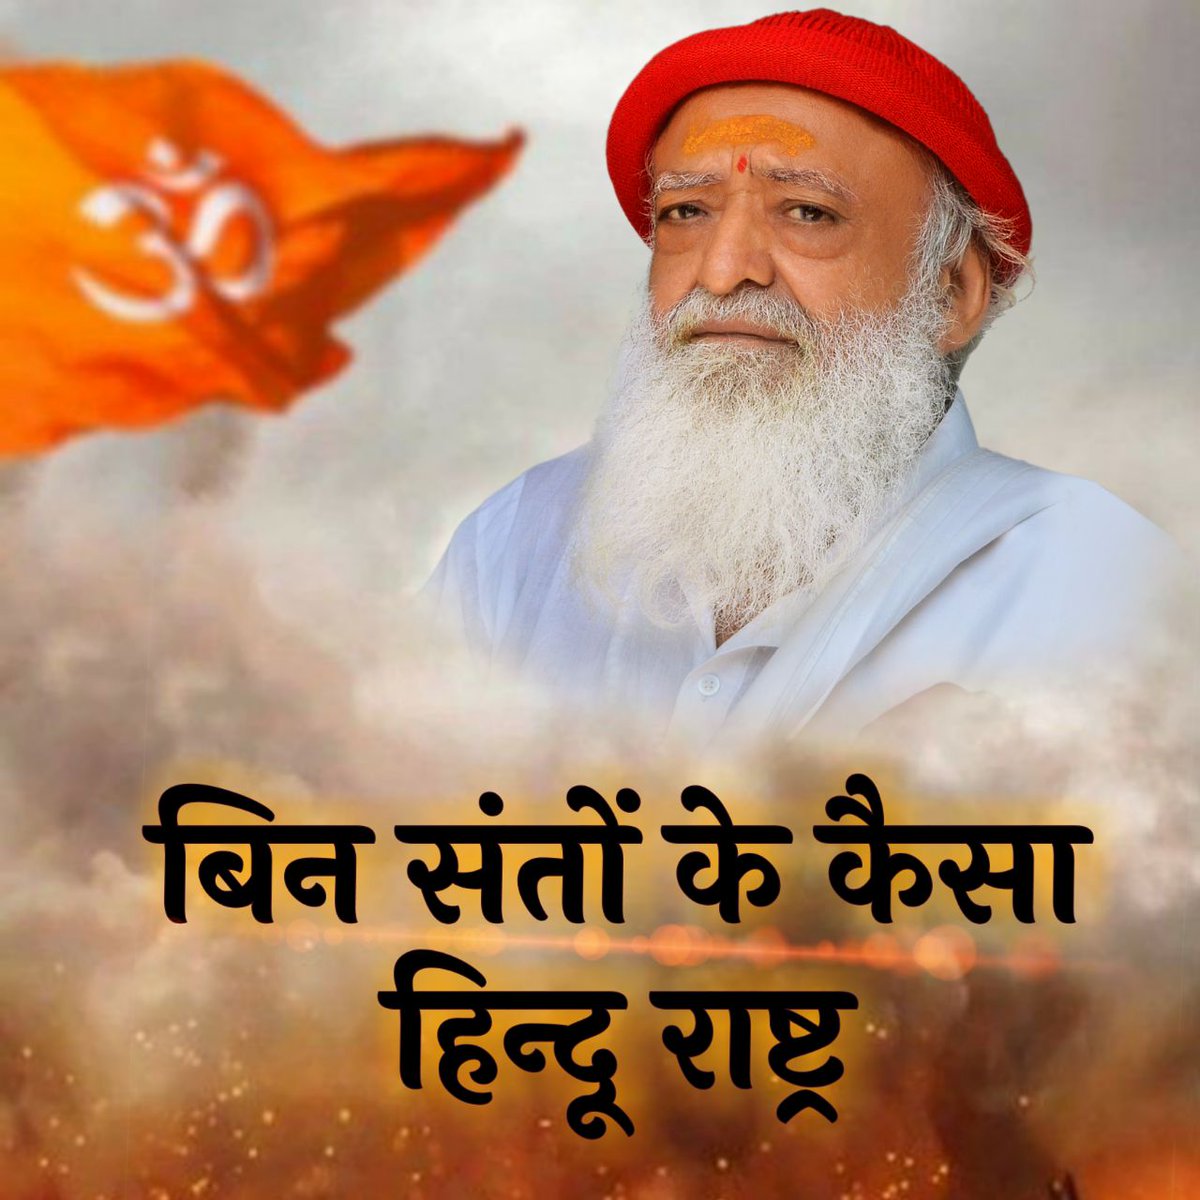 Pious Sant Shri Asharamji Bapu's 425 ashrams, 1400+ committees, and 17,000+ बालसंकर  केंद्र  globally serve society and culture selflessly. Yet, he's trapped in false cases. Let's ensure he receives the fair justice he deserves. 
#StandUpForDharma 🙏